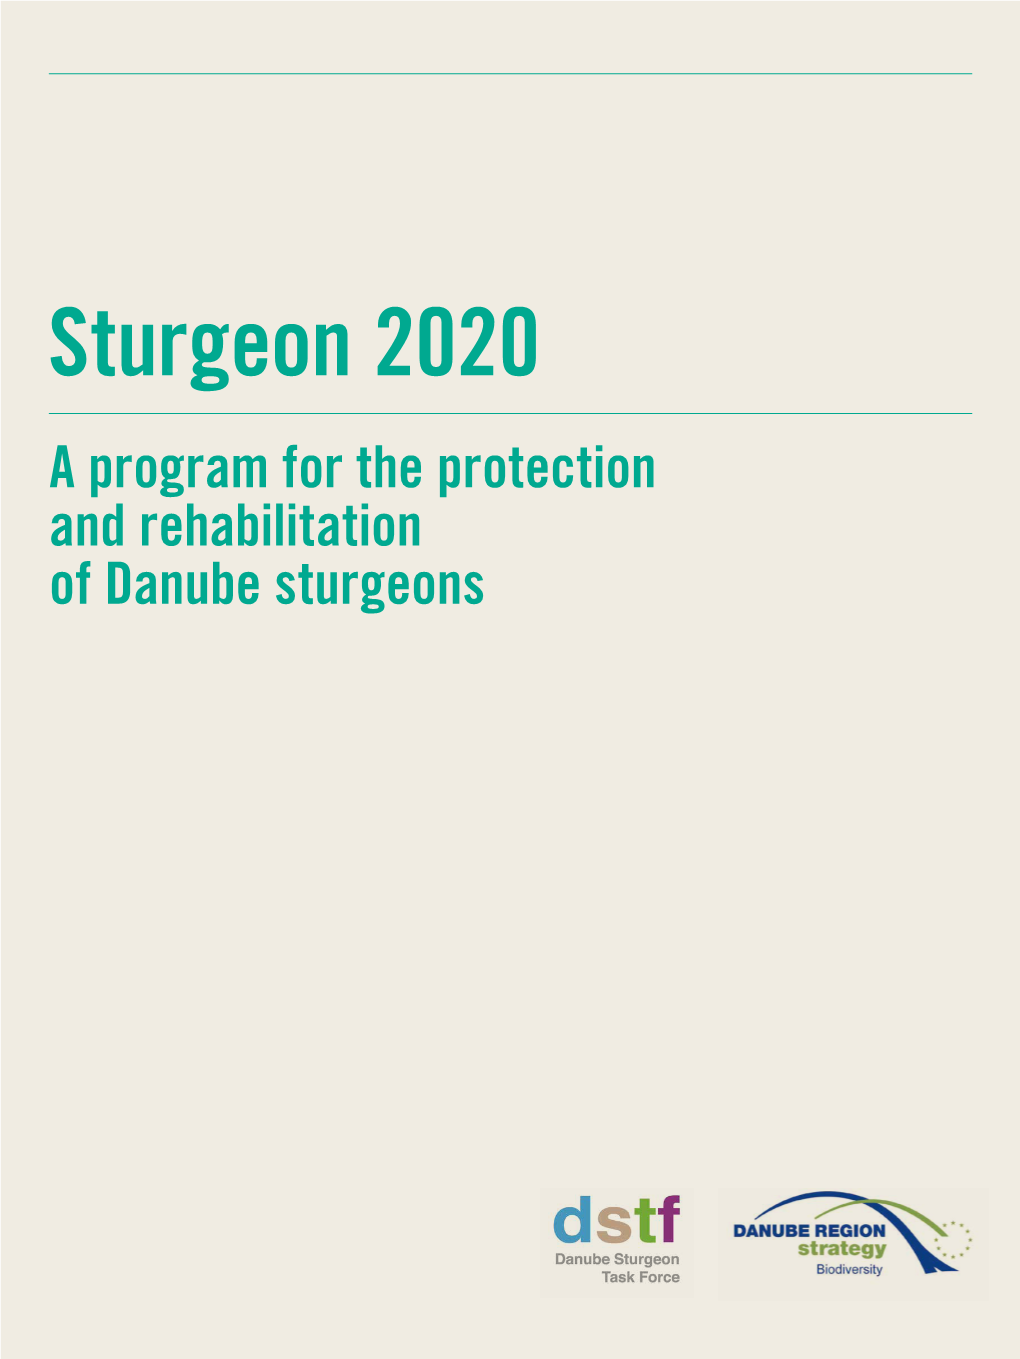 Sturgeon 2020 a Program for the Protection and Rehabilitation of Danube Sturgeons